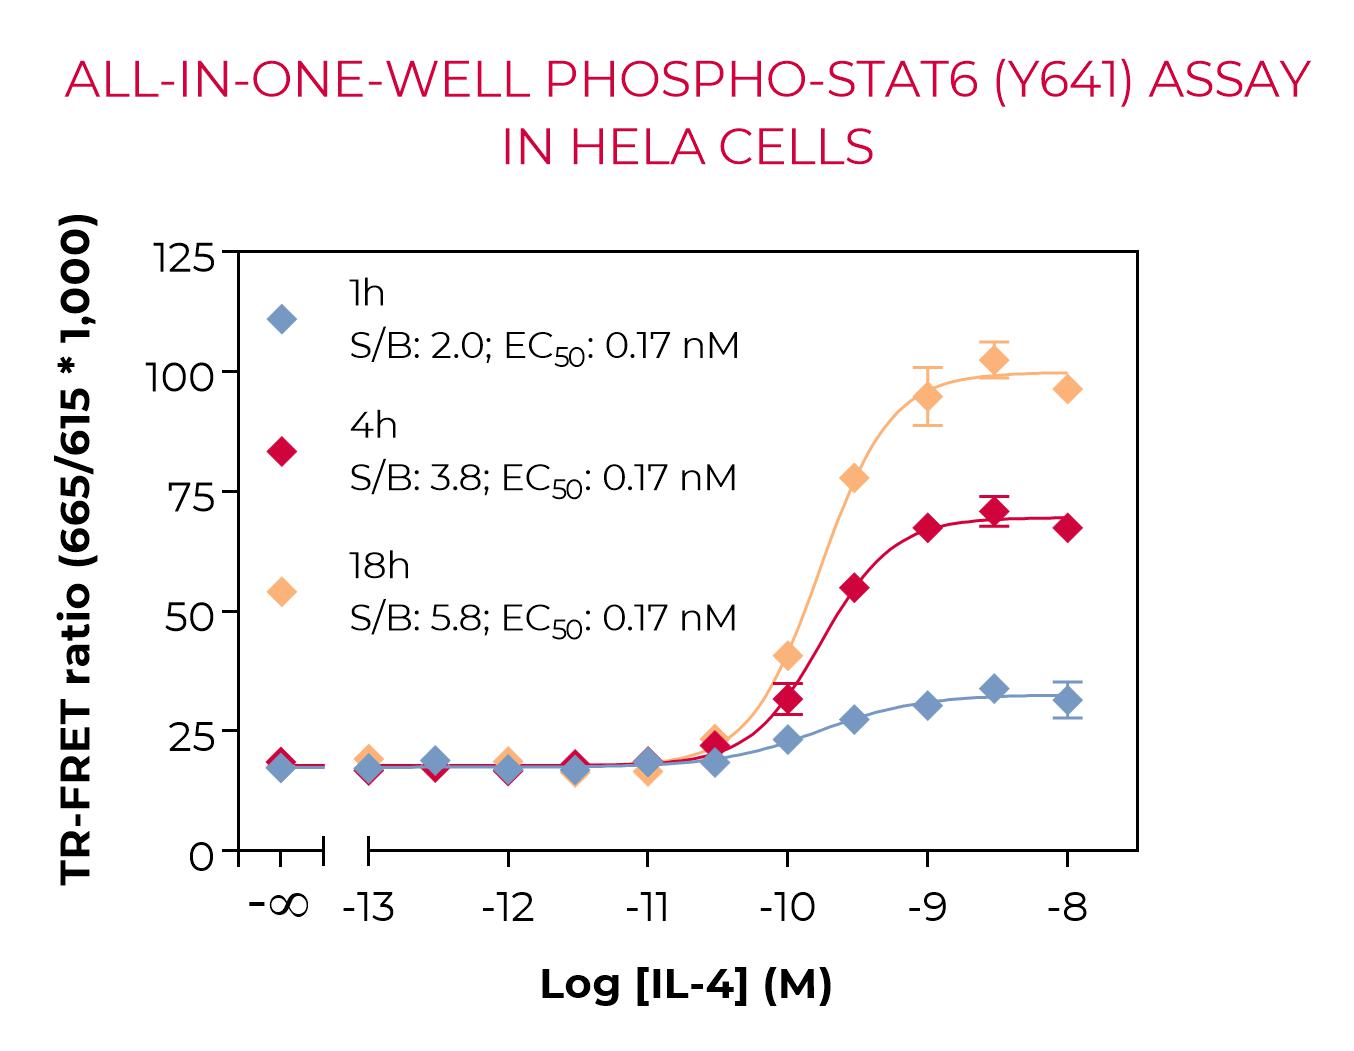 All-in-one-well Phospho-STAT6 (Y641) assay